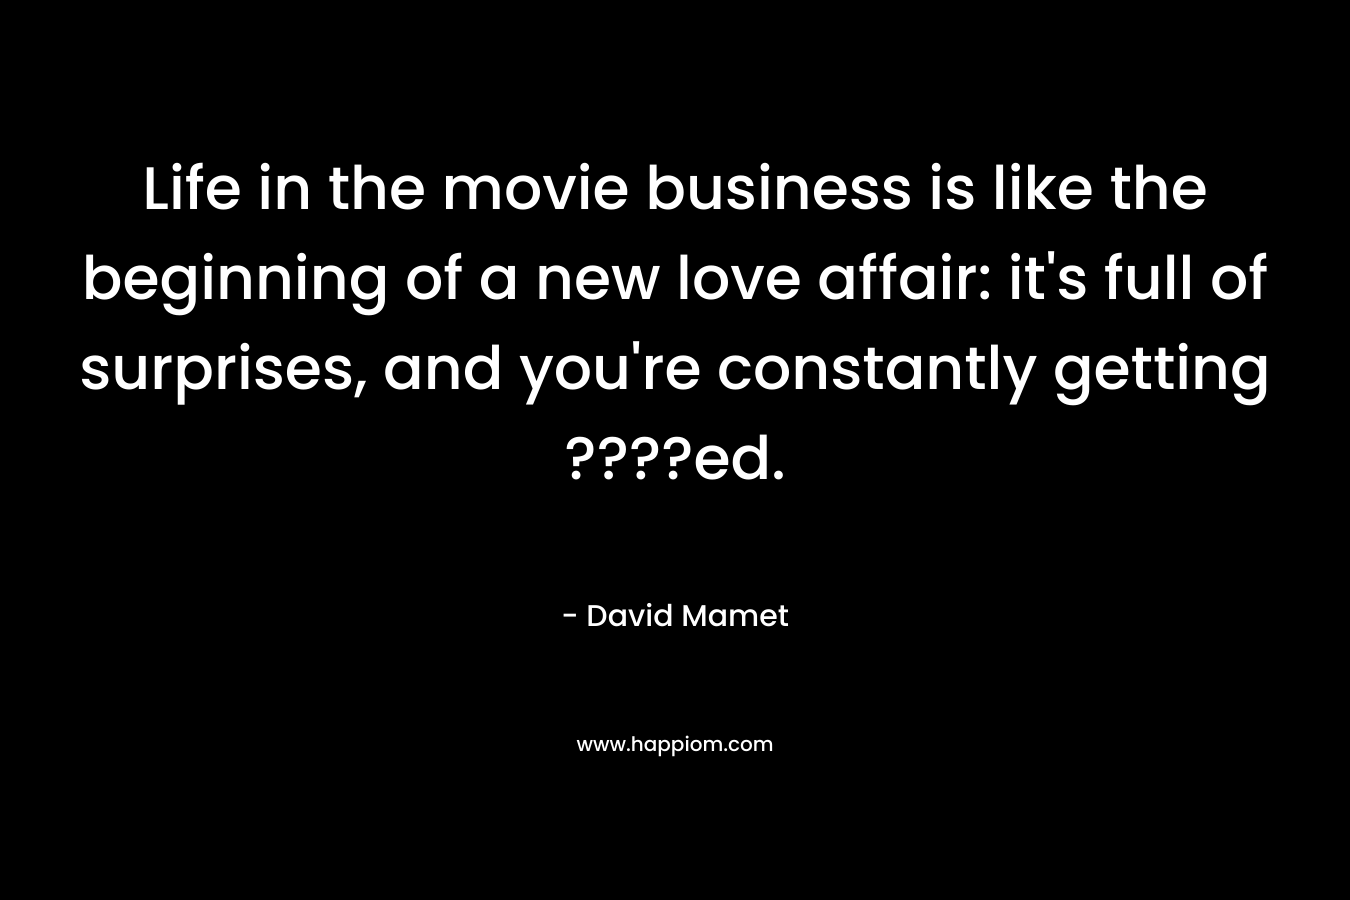 Life in the movie business is like the beginning of a new love affair: it’s full of surprises, and you’re constantly getting ????ed. – David Mamet